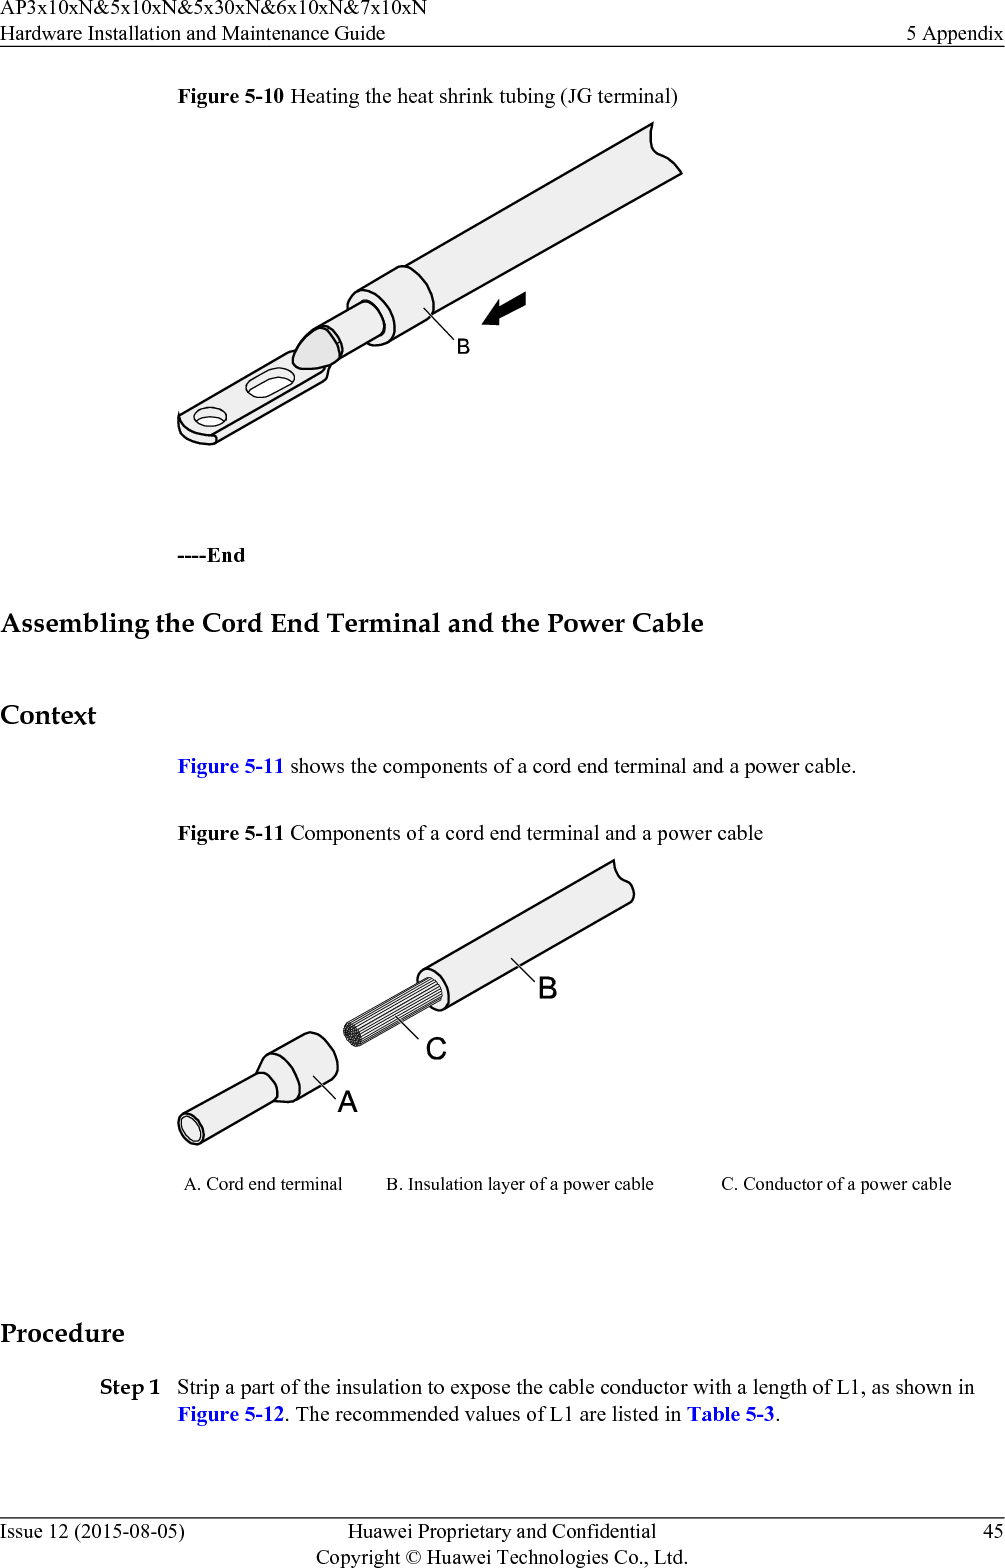 Figure 5-10 Heating the heat shrink tubing (JG terminal) ----EndAssembling the Cord End Terminal and the Power CableContextFigure 5-11 shows the components of a cord end terminal and a power cable.Figure 5-11 Components of a cord end terminal and a power cableA. Cord end terminal B. Insulation layer of a power cable C. Conductor of a power cable ProcedureStep 1 Strip a part of the insulation to expose the cable conductor with a length of L1, as shown inFigure 5-12. The recommended values of L1 are listed in Table 5-3.AP3x10xN&amp;5x10xN&amp;5x30xN&amp;6x10xN&amp;7x10xNHardware Installation and Maintenance Guide 5 AppendixIssue 12 (2015-08-05) Huawei Proprietary and ConfidentialCopyright © Huawei Technologies Co., Ltd.45